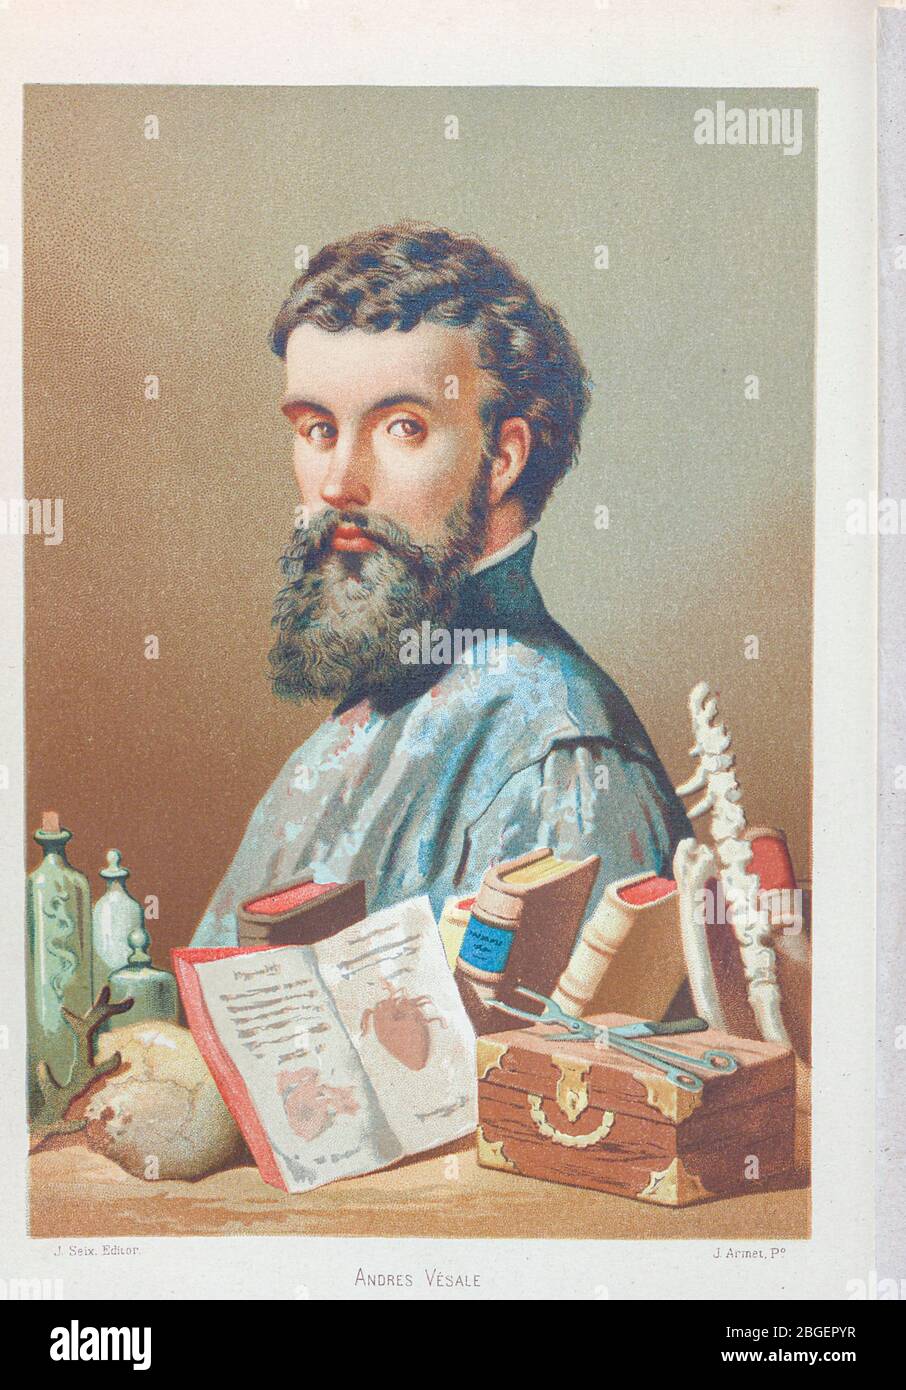 Andreas Vesalius [Andres Vesale] (31 December 1514 – 15 October 1564) was a 16th-century Flemish anatomist, physician, and author of one of the most influential books on human anatomy, De Humani Corporis Fabrica Libri Septem (On the Fabric of the Human Body). Vesalius is often referred to as the founder of modern human anatomy. Andreas Vesalius is the Latinized form of the Dutch Andries van Wesel. From the book La ciencia y sus hombres : vidas de los sabios ilustres desde la antigüedad hasta el siglo XIX T. 2  [Science and its men: lives of the illustrious sages from antiquity to the 19th cent Stock Photo